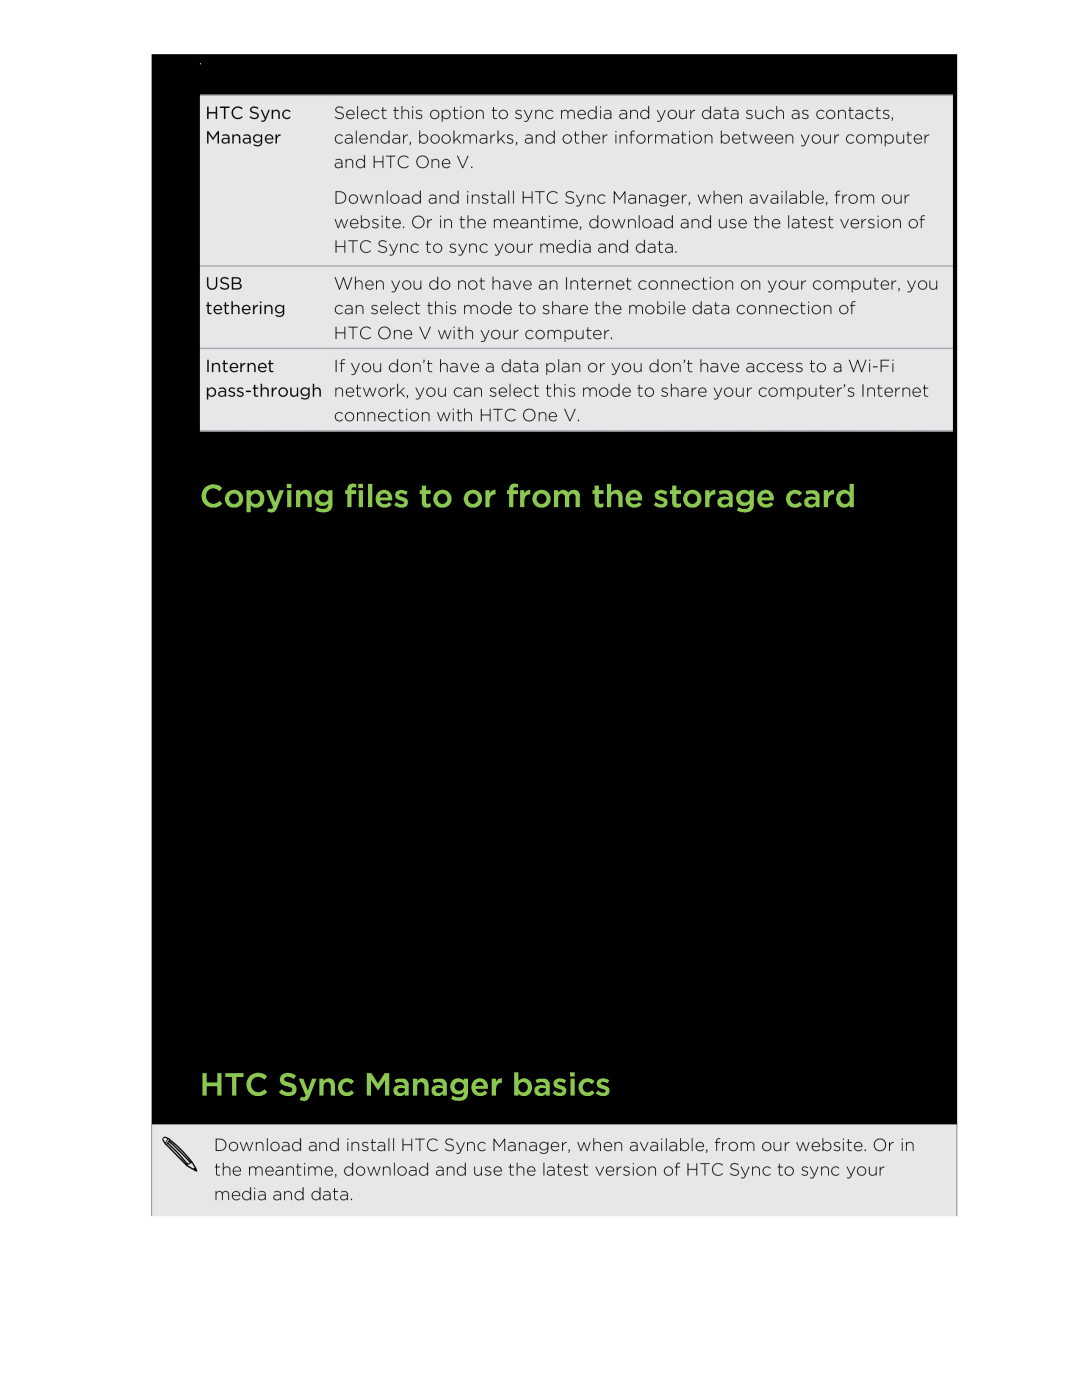 HTC C3HTCONEV4GBUNLOCKEDBLACK Copying files to or from the storage card, HTC Sync Manager basics, Your phone and computer 